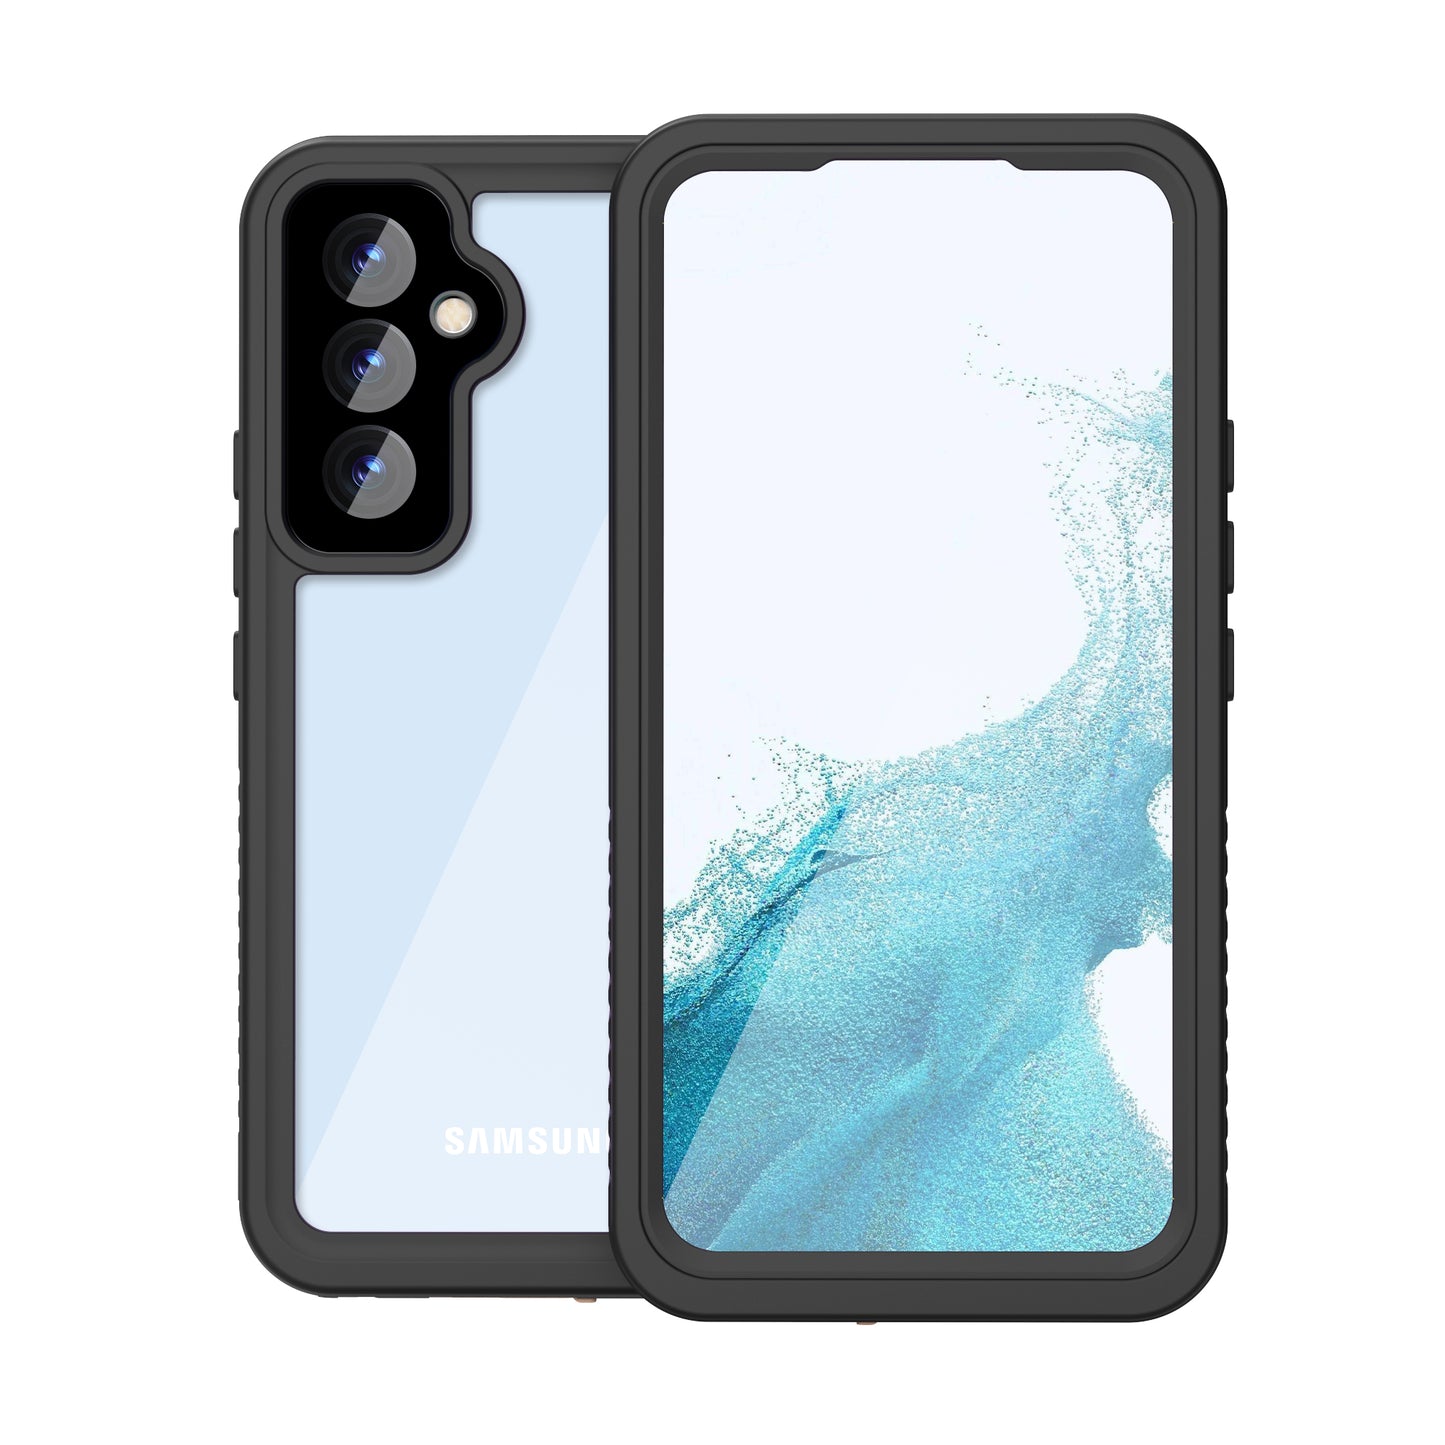 Samsung Galaxy A54 Case Waterproof 4 in 1 Clear IP68 Certification Full Protection